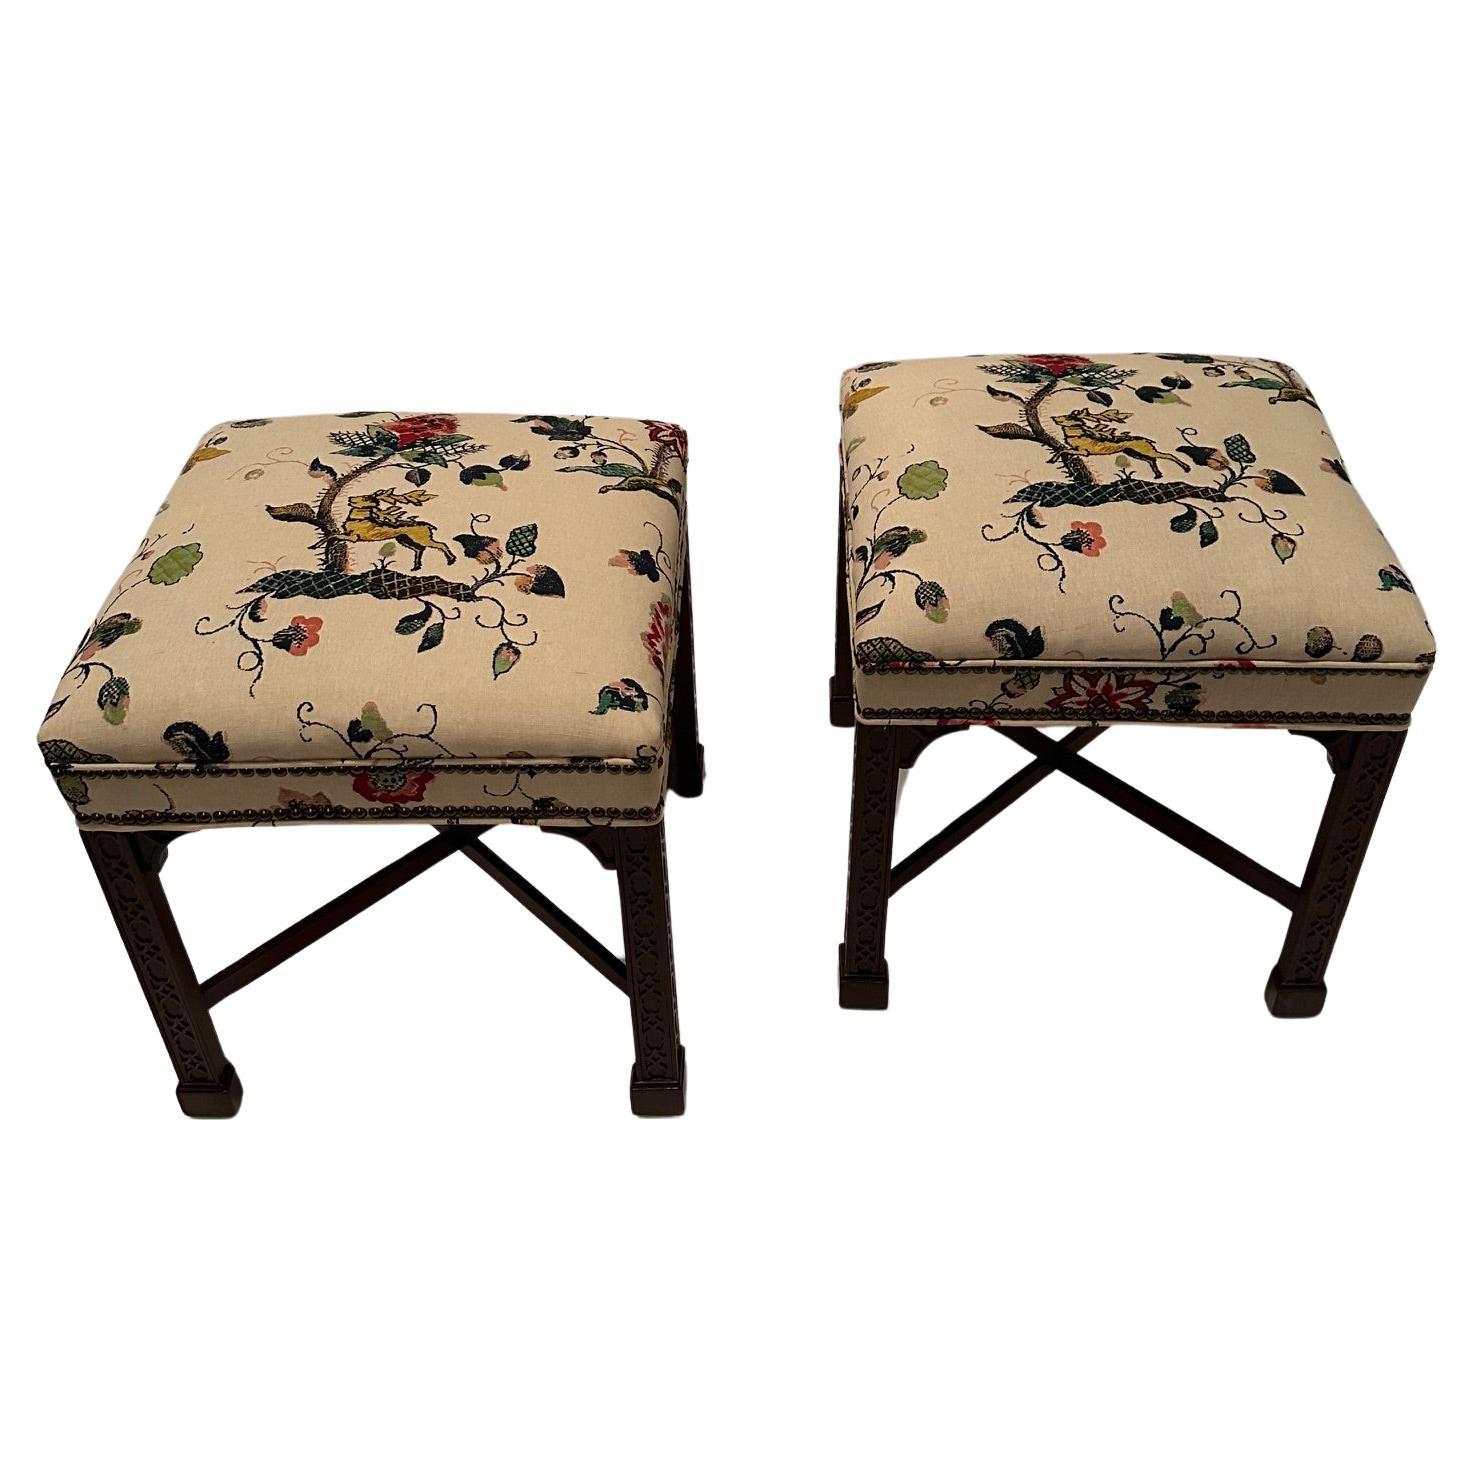 Lovely Pair of Vintage Chinese Chippendale Style Benches Upholstered in Lee Jofa For Sale